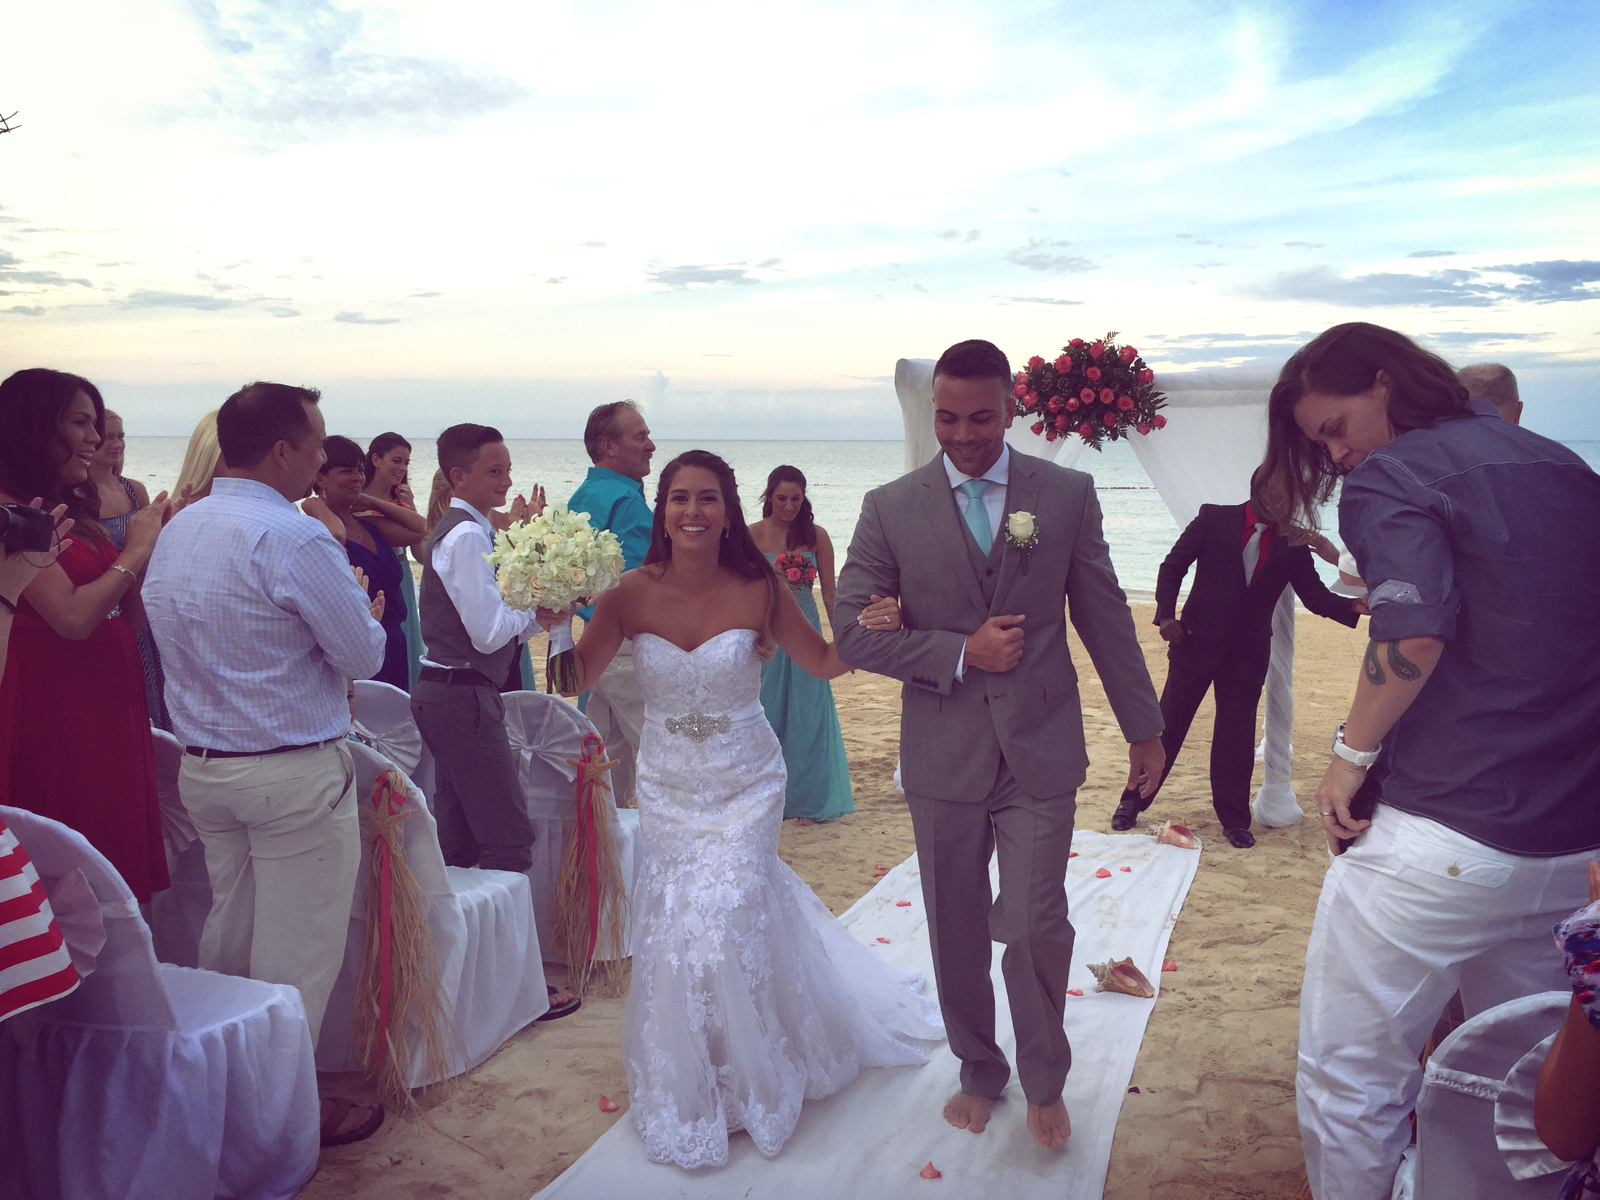 A Wedding in Jamaica ft. The Stovers